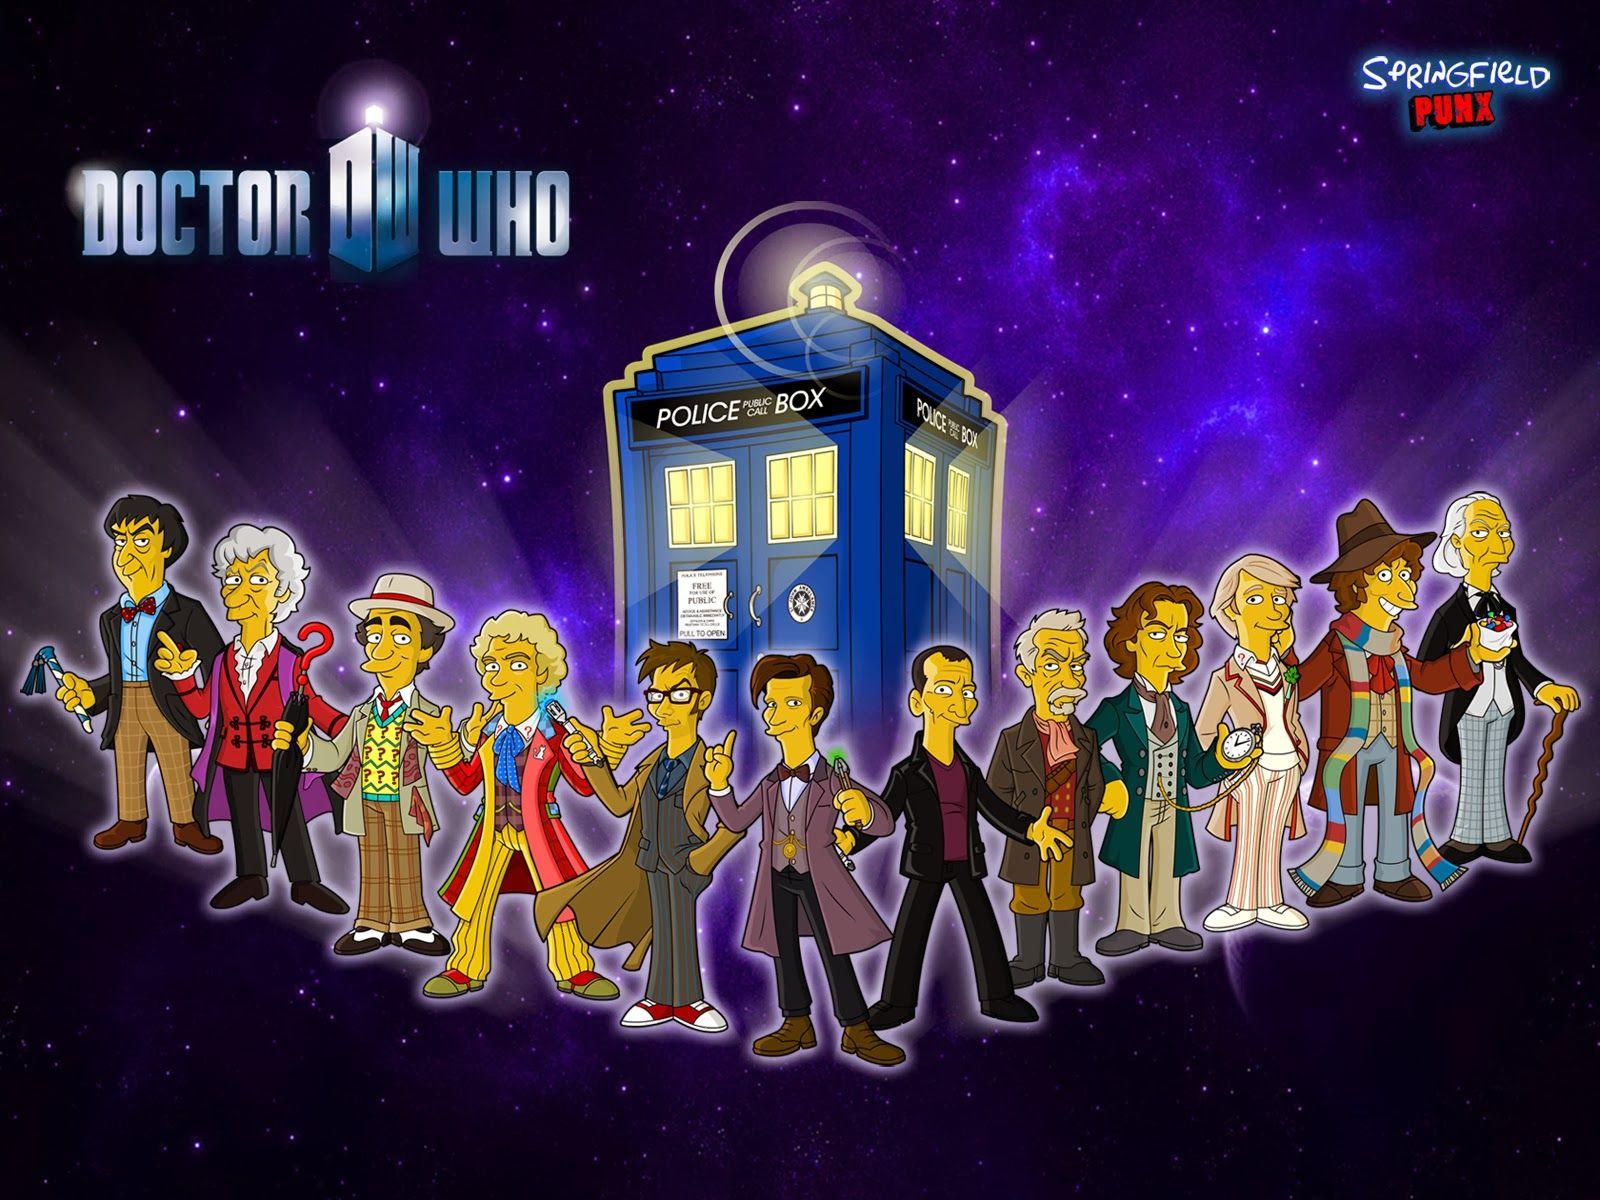 Springfield Punx: New Doctor Who Wallpaper!